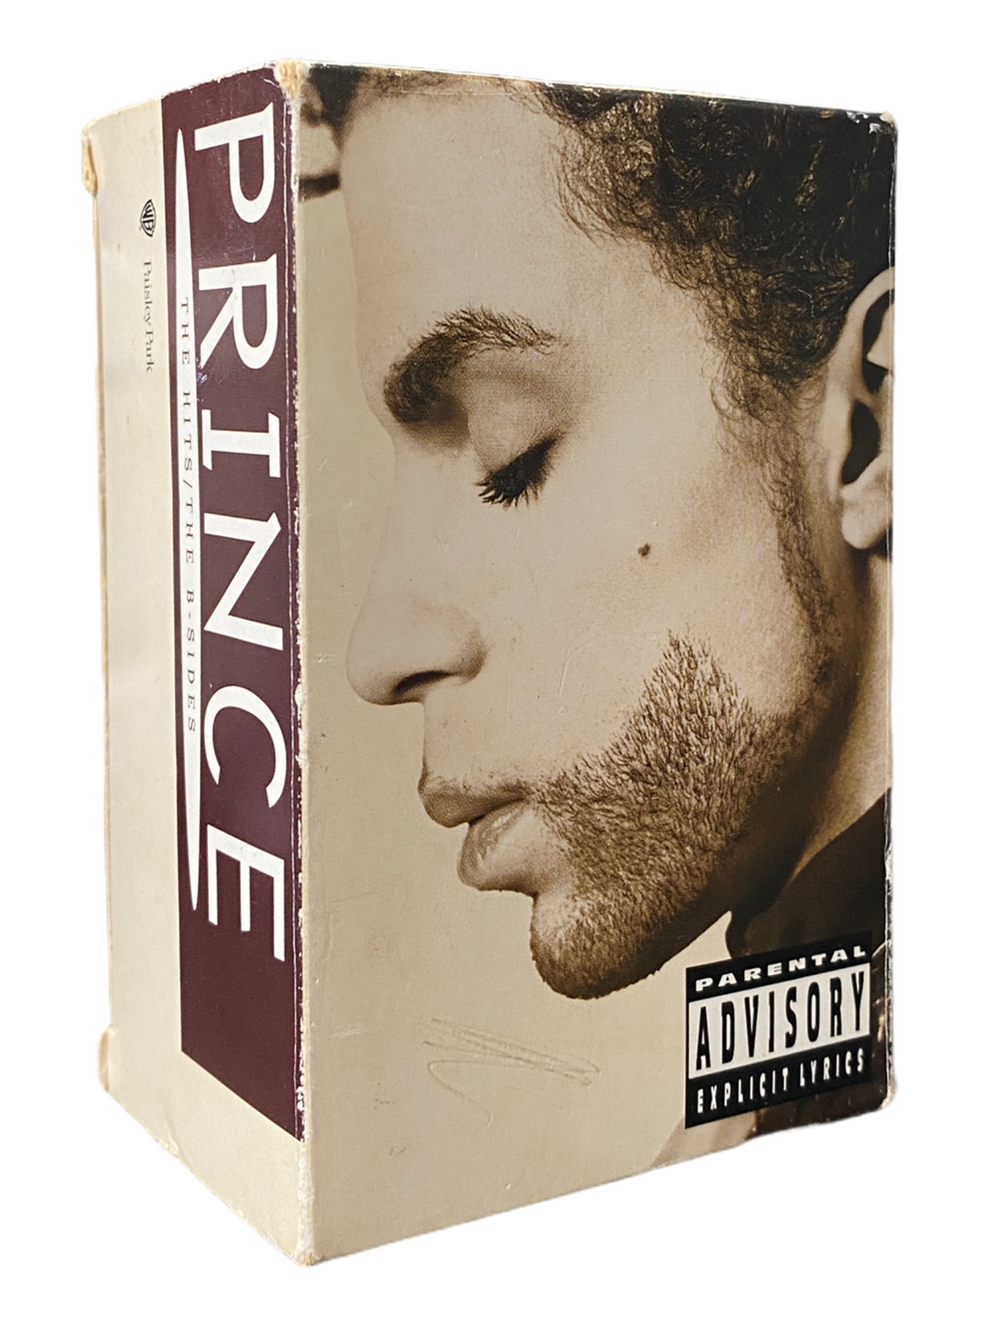 Prince – The Hits The B-Sides Original  Release Tape Cassette Box Set